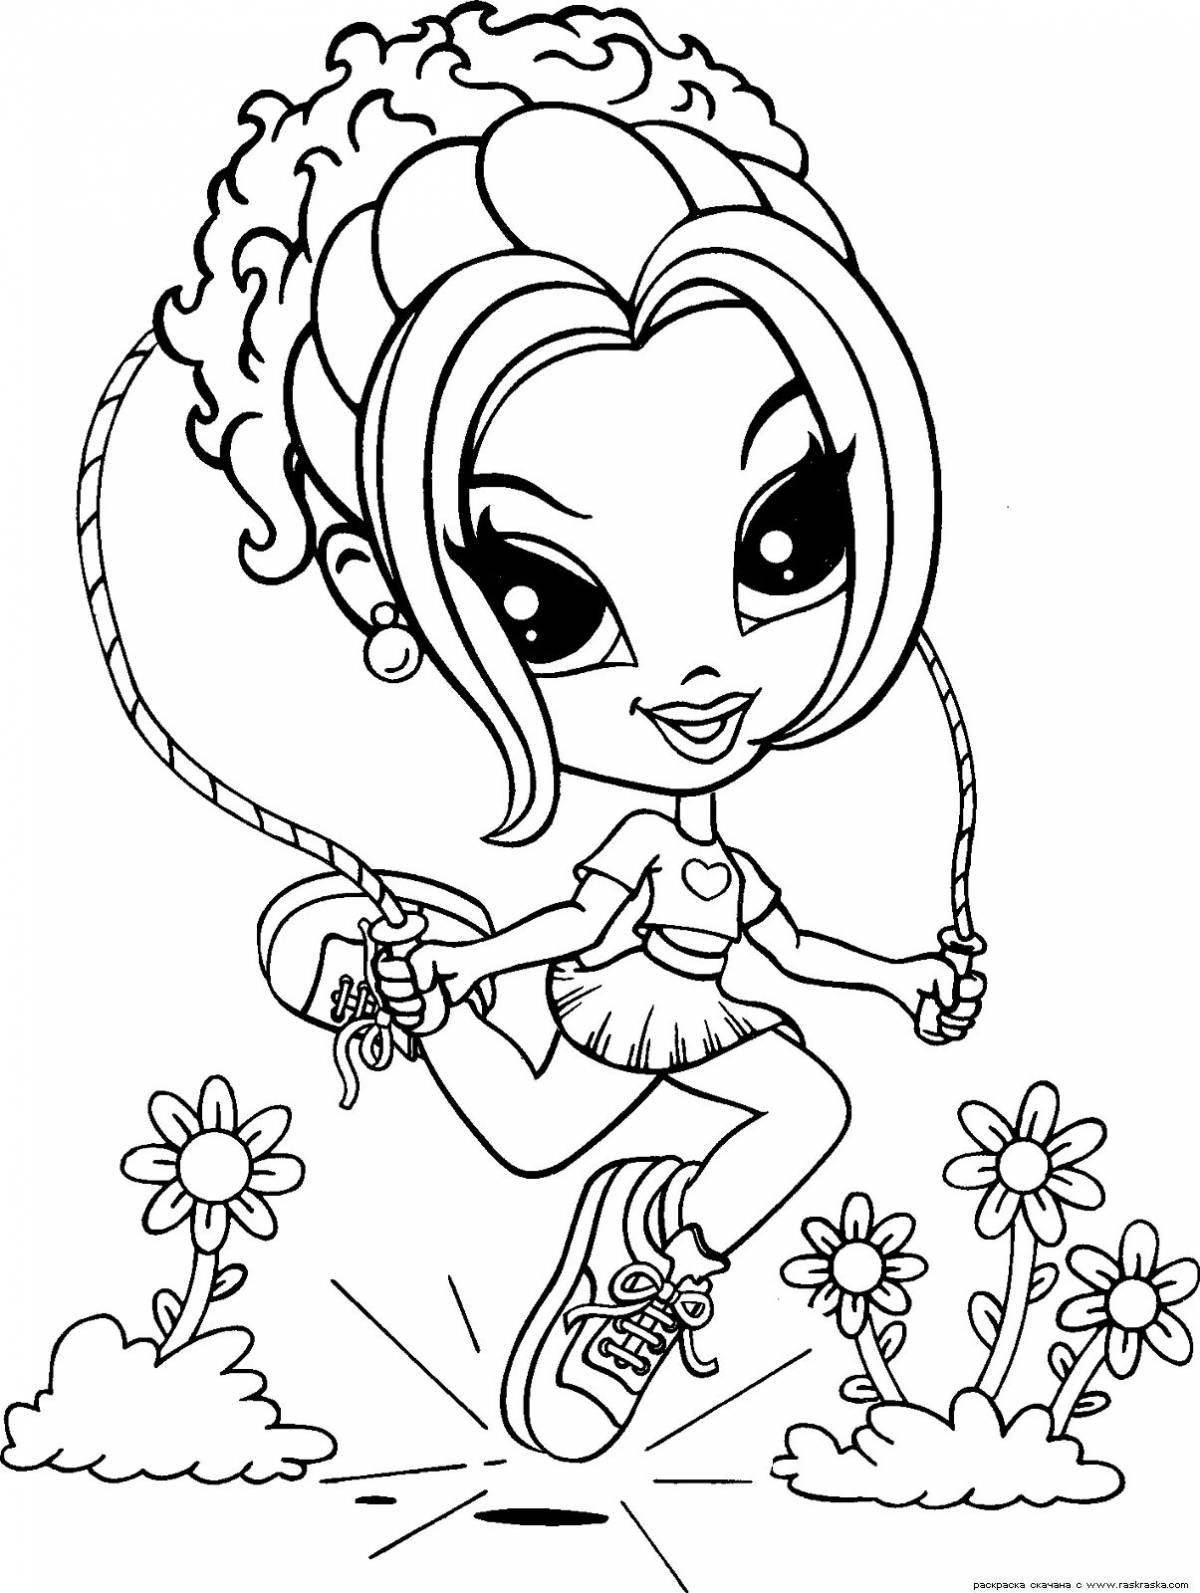 Radiant coloring page 4 for girls